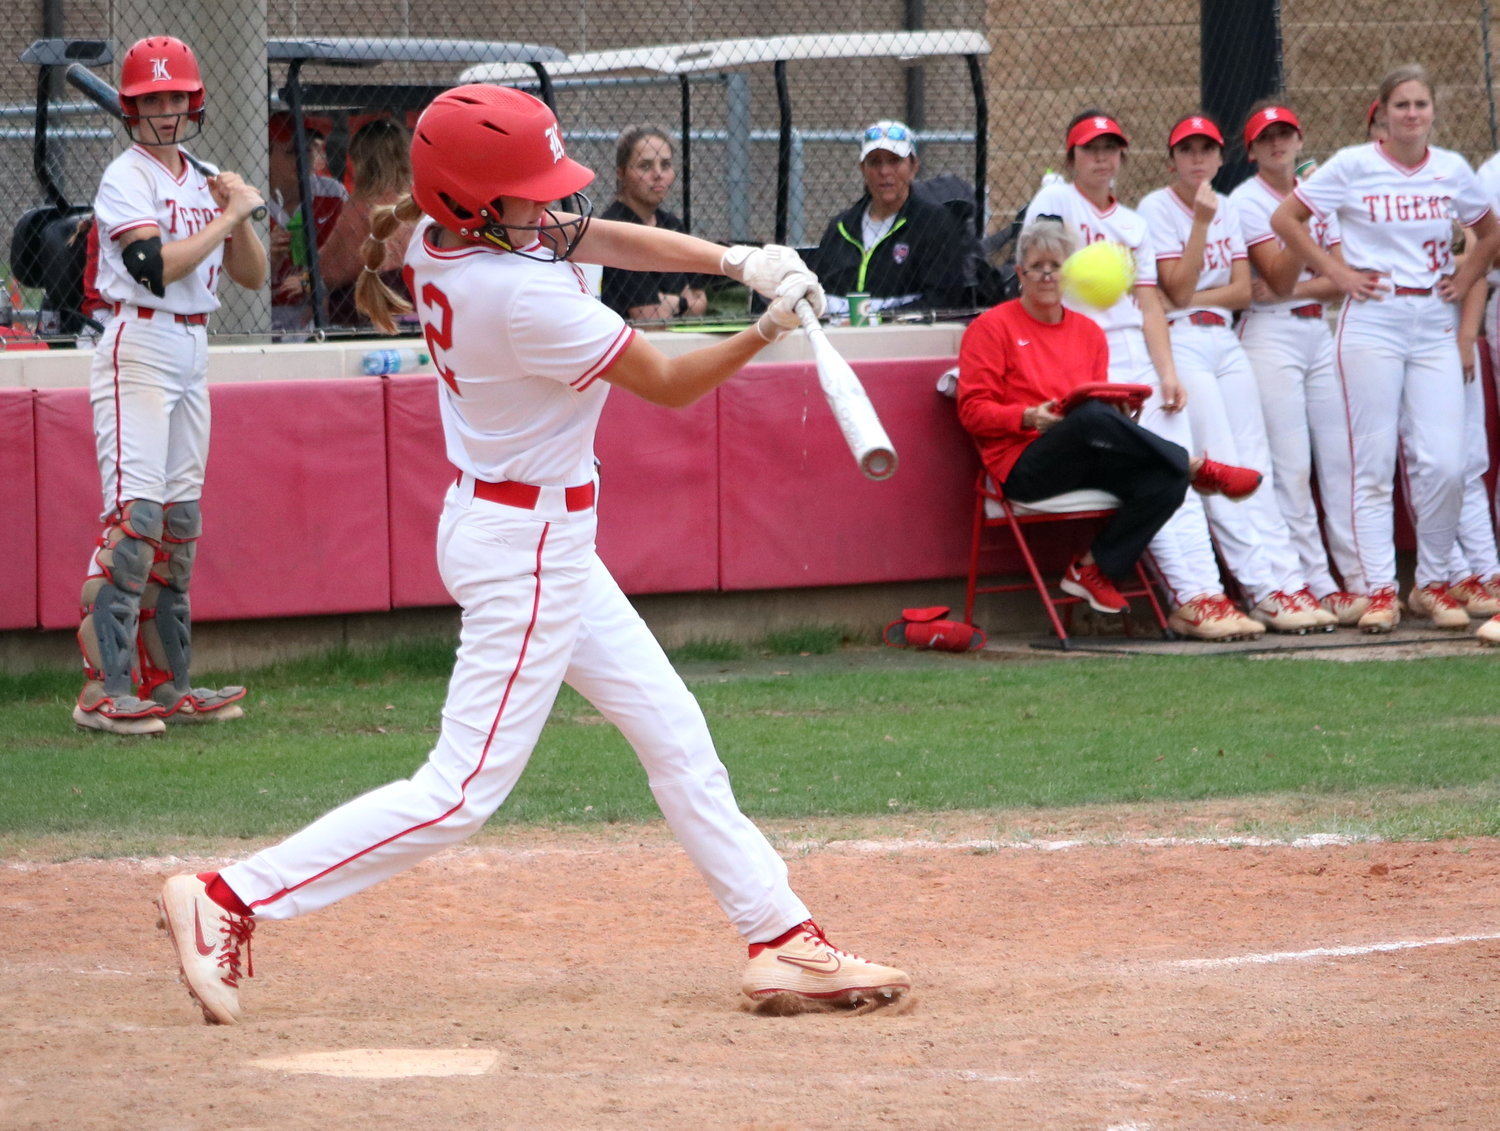 Avery Porter hits during Tuesday’s game between Katy and Taylor at the Katy softball field.